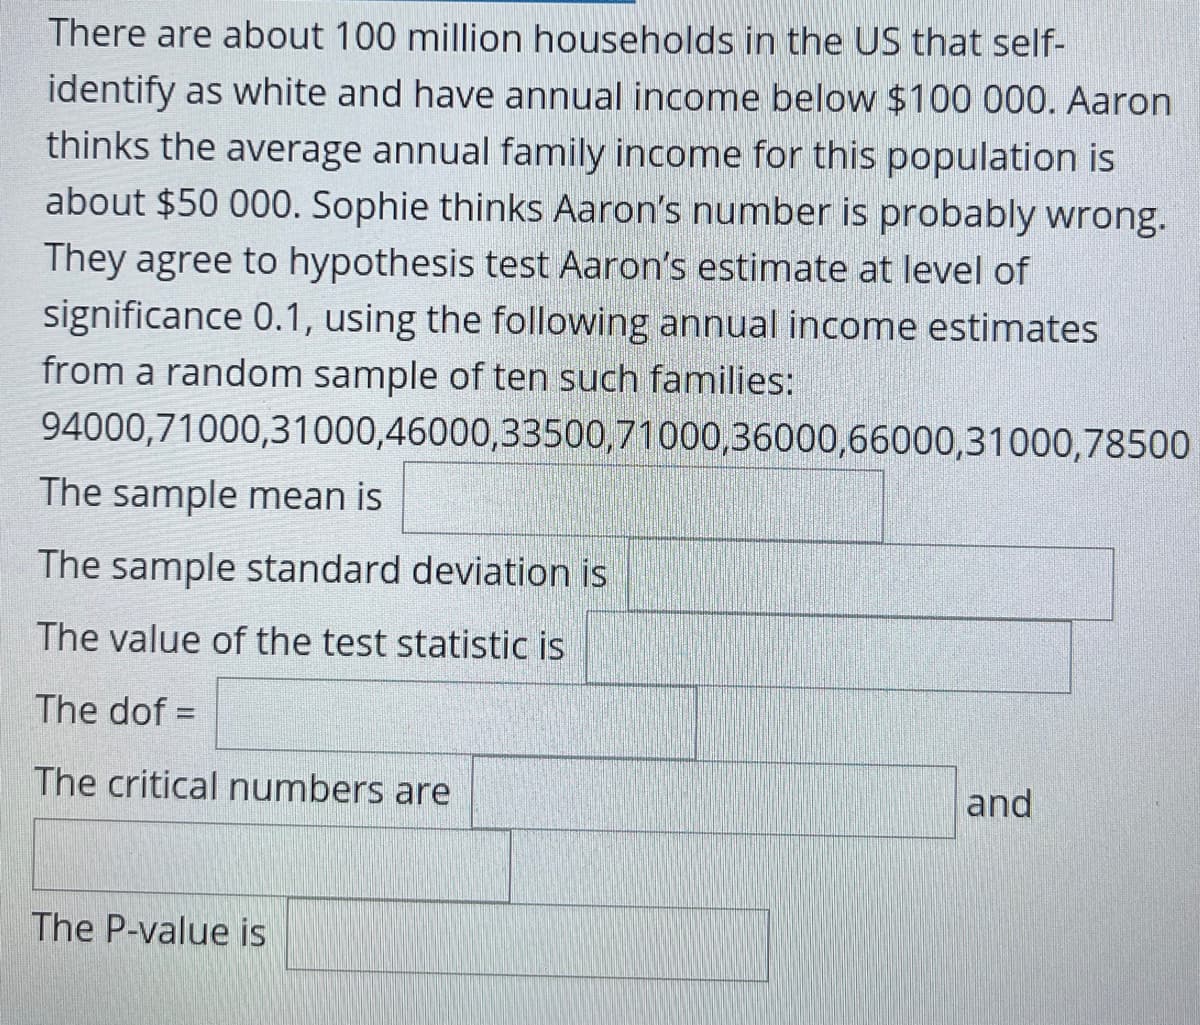 There are about 100 million households in the US that self-
identify as white and have annual income below $100 000. Aaron
thinks the average annual family income for this population is
about $50 000. Sophie thinks Aaron's number is probably wrong.
They agree to hypothesis test Aaron's estimate at level of
significance 0.1, using the following annual income estimates
from a random sample of ten such families:
94000,71000,31000,46000,33500,71000,36000,66000,31000,78500
The sample mean is
The sample standard deviation is
The value of the test statistic is
The dof =
The critical numbers are
and
The P-value is
